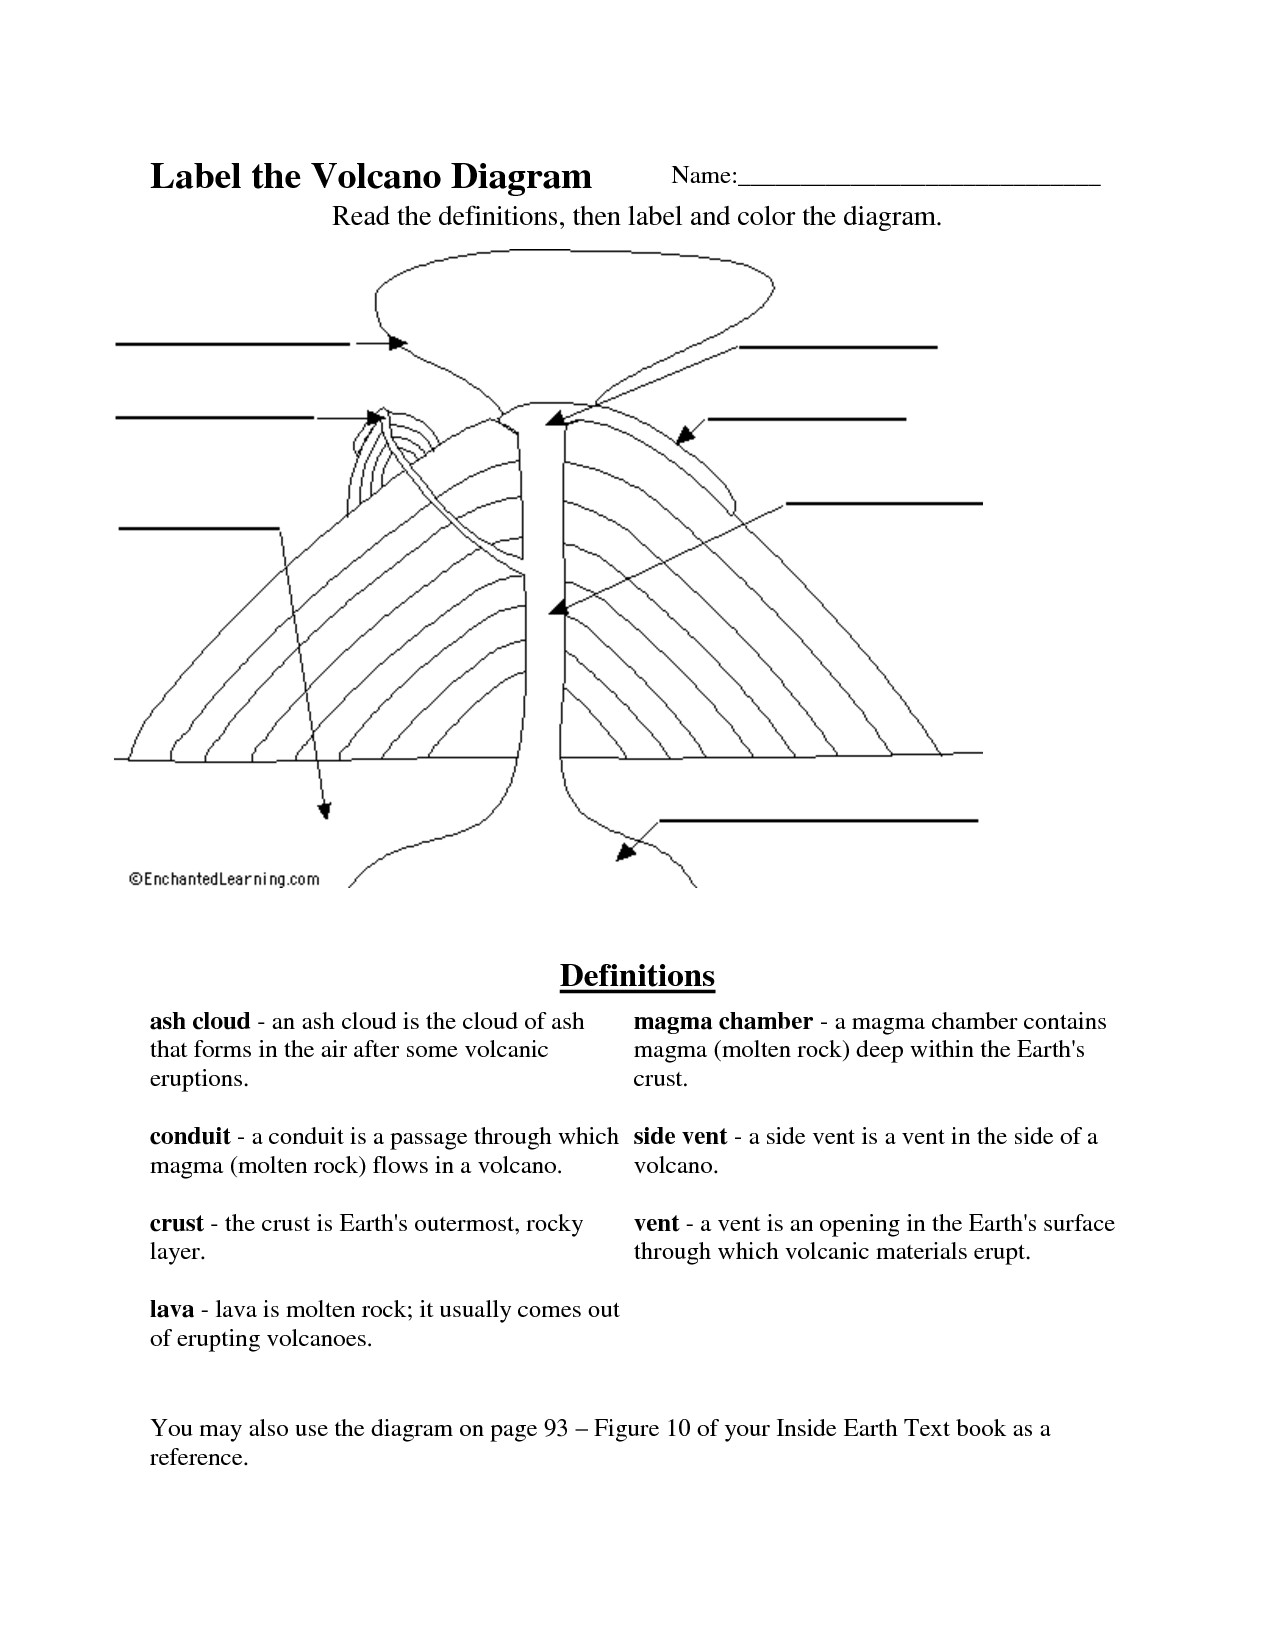 Free Math Worksheets Third Grade 3 Subtraction Subtract whole Thousands